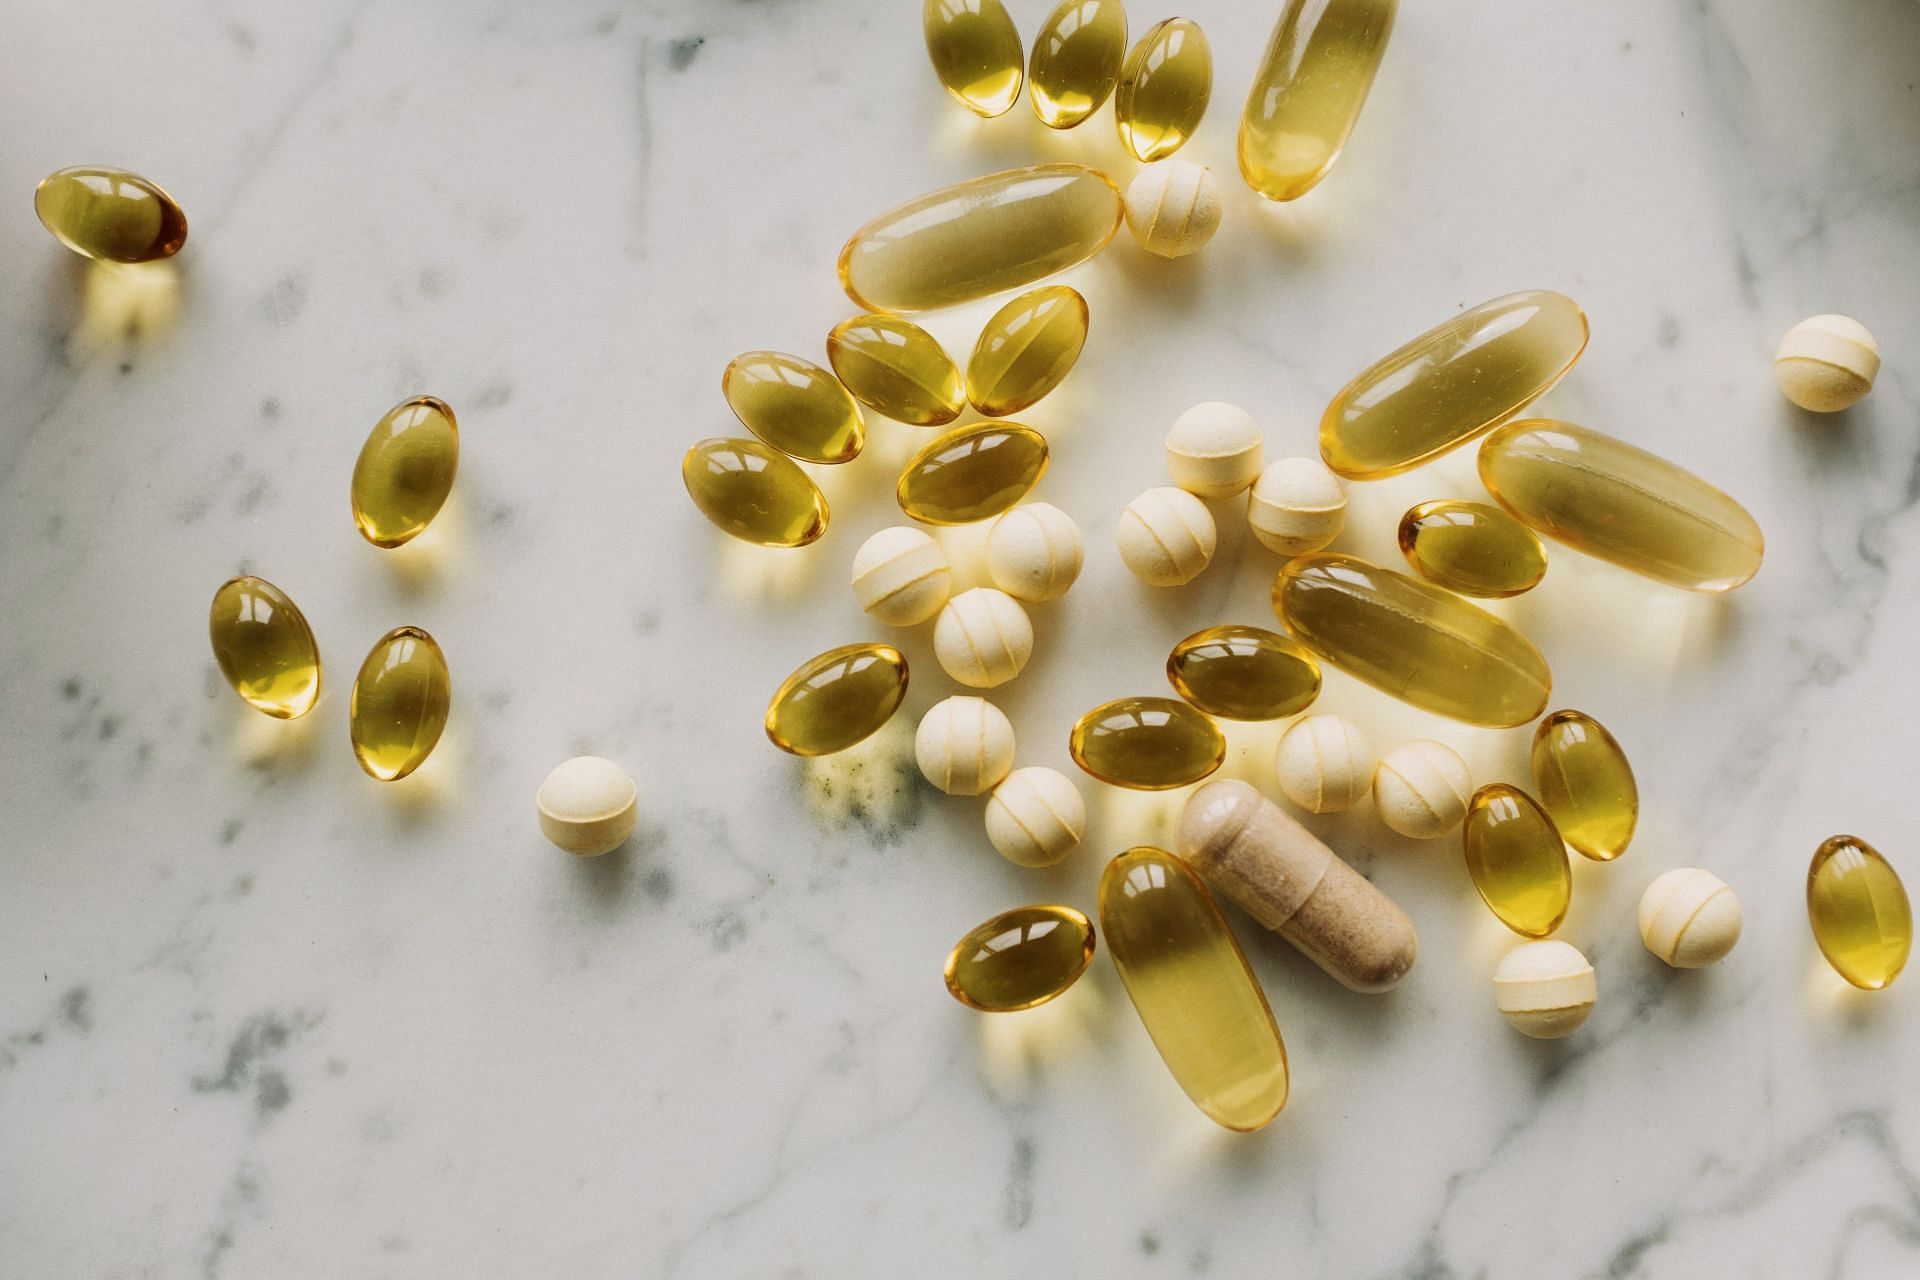 Krill oil comes in the form of softgel capsules. (Image via Pexels/ Ready Made)